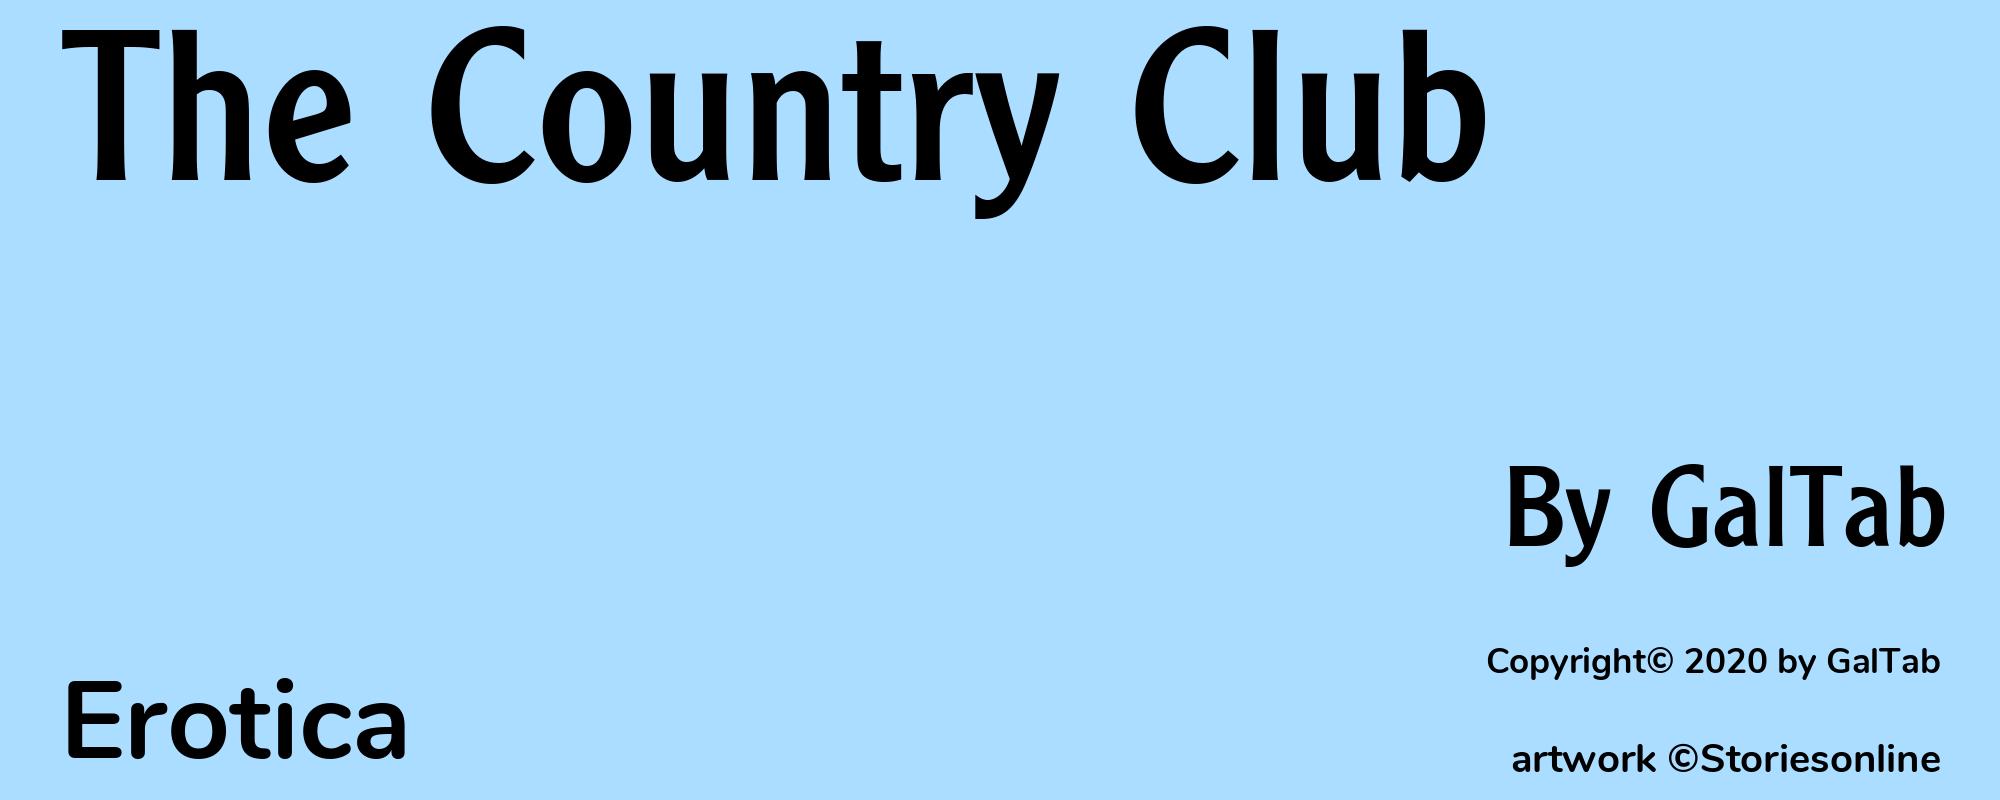 The Country Club - Cover